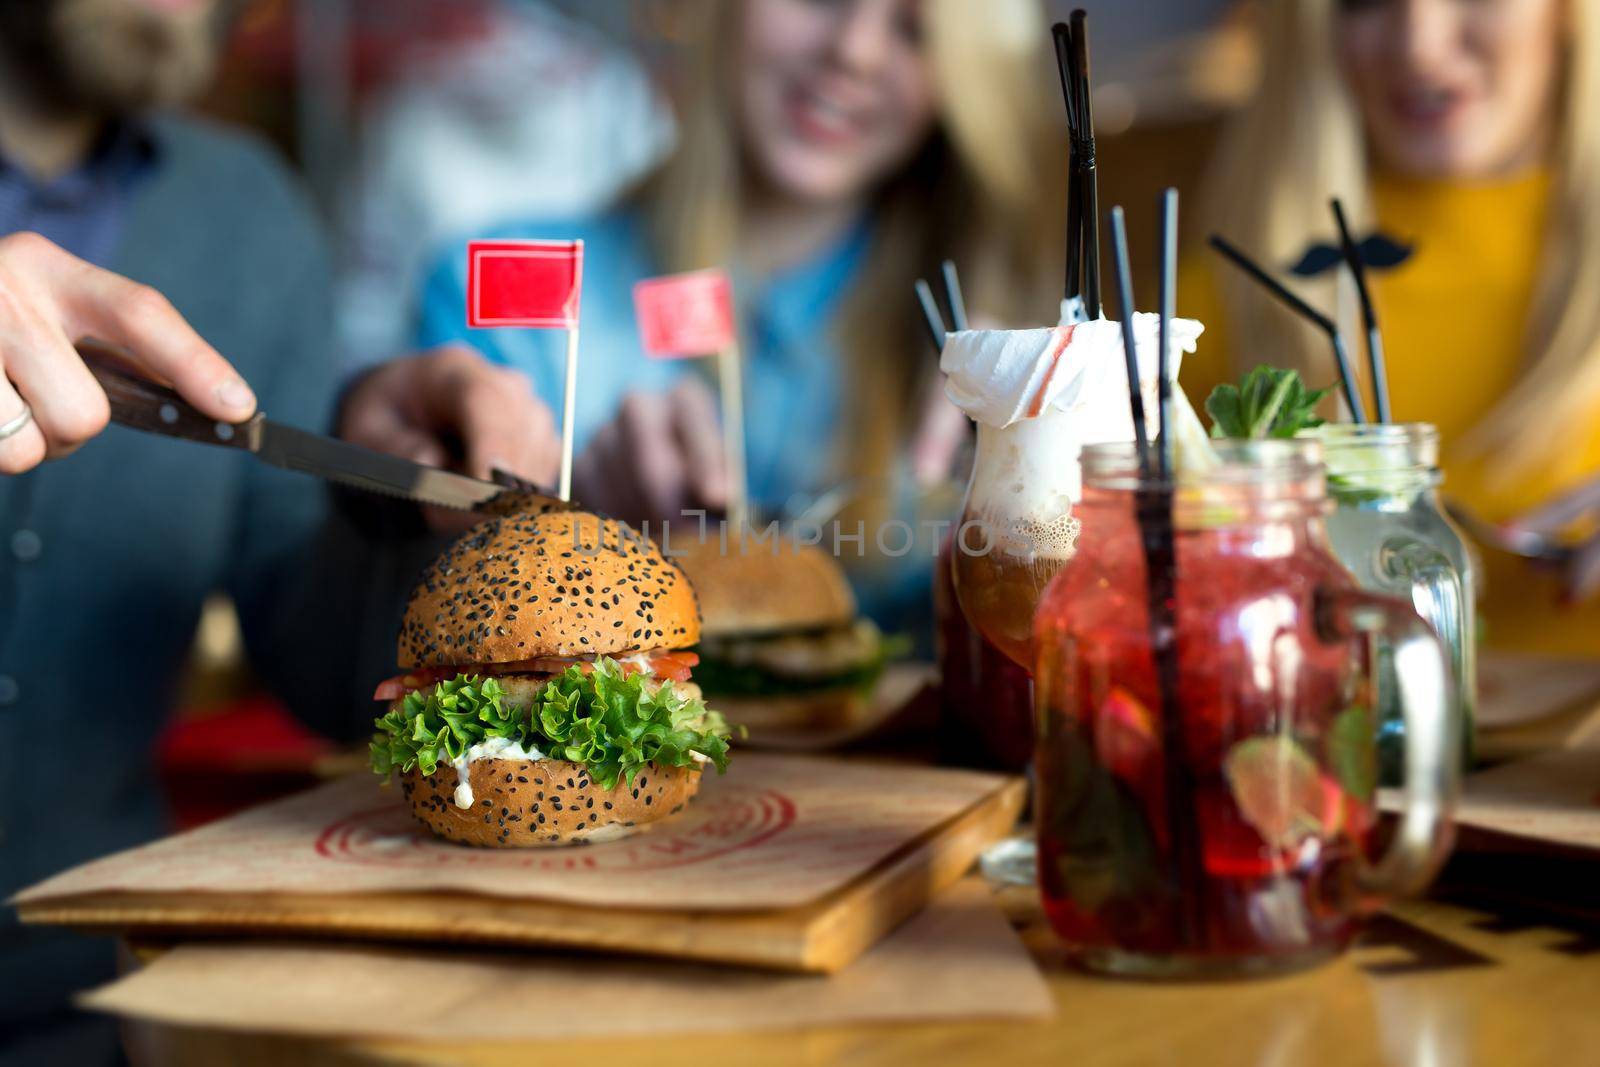 Burger and cocktail on a wooden table in a restaurant close-up.